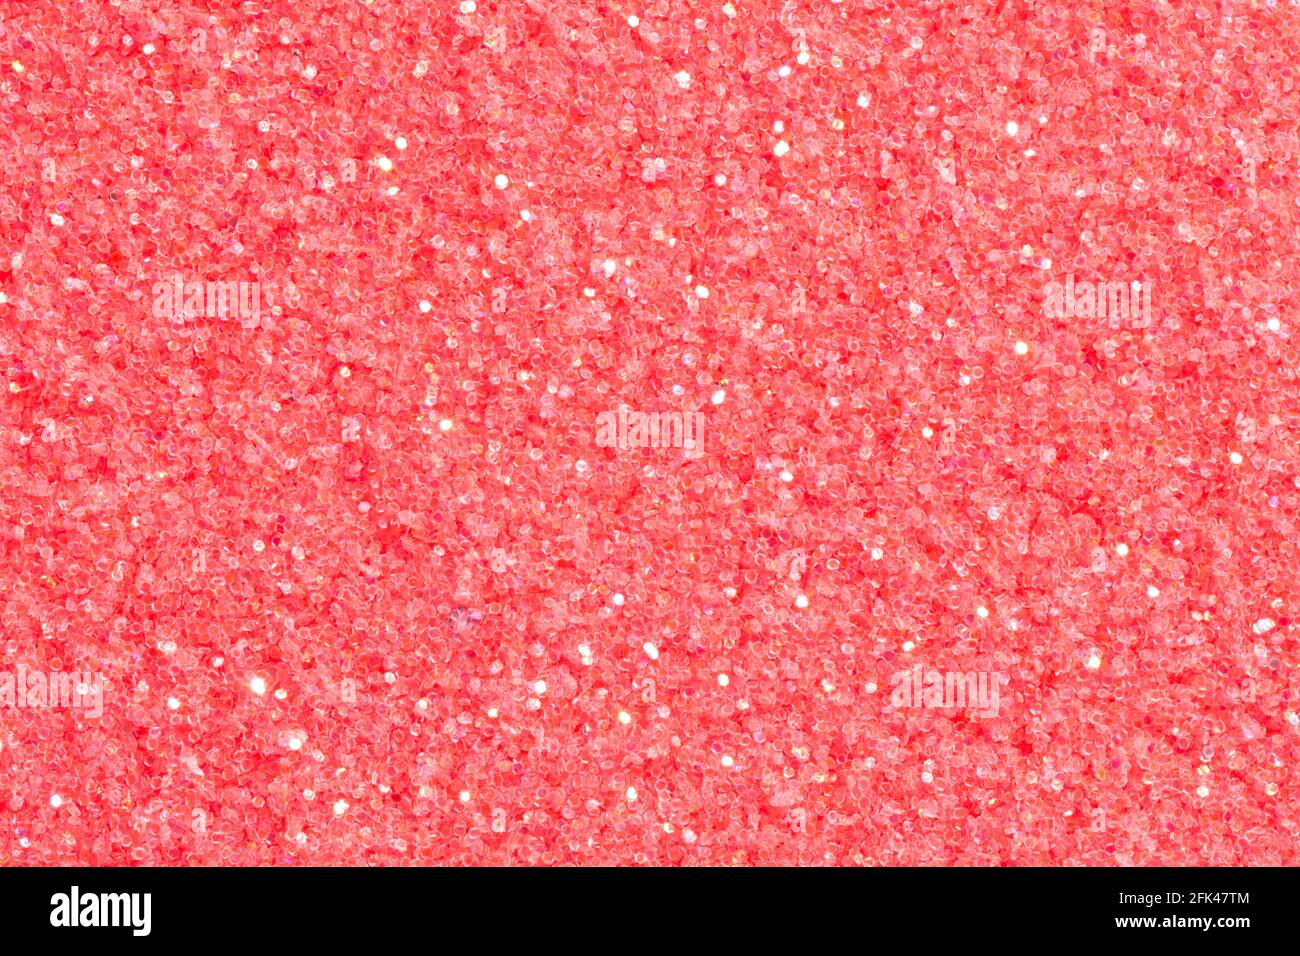 Saturated rose background with glitter. Texture for Christmas and New Year's concerts. Stock Photo